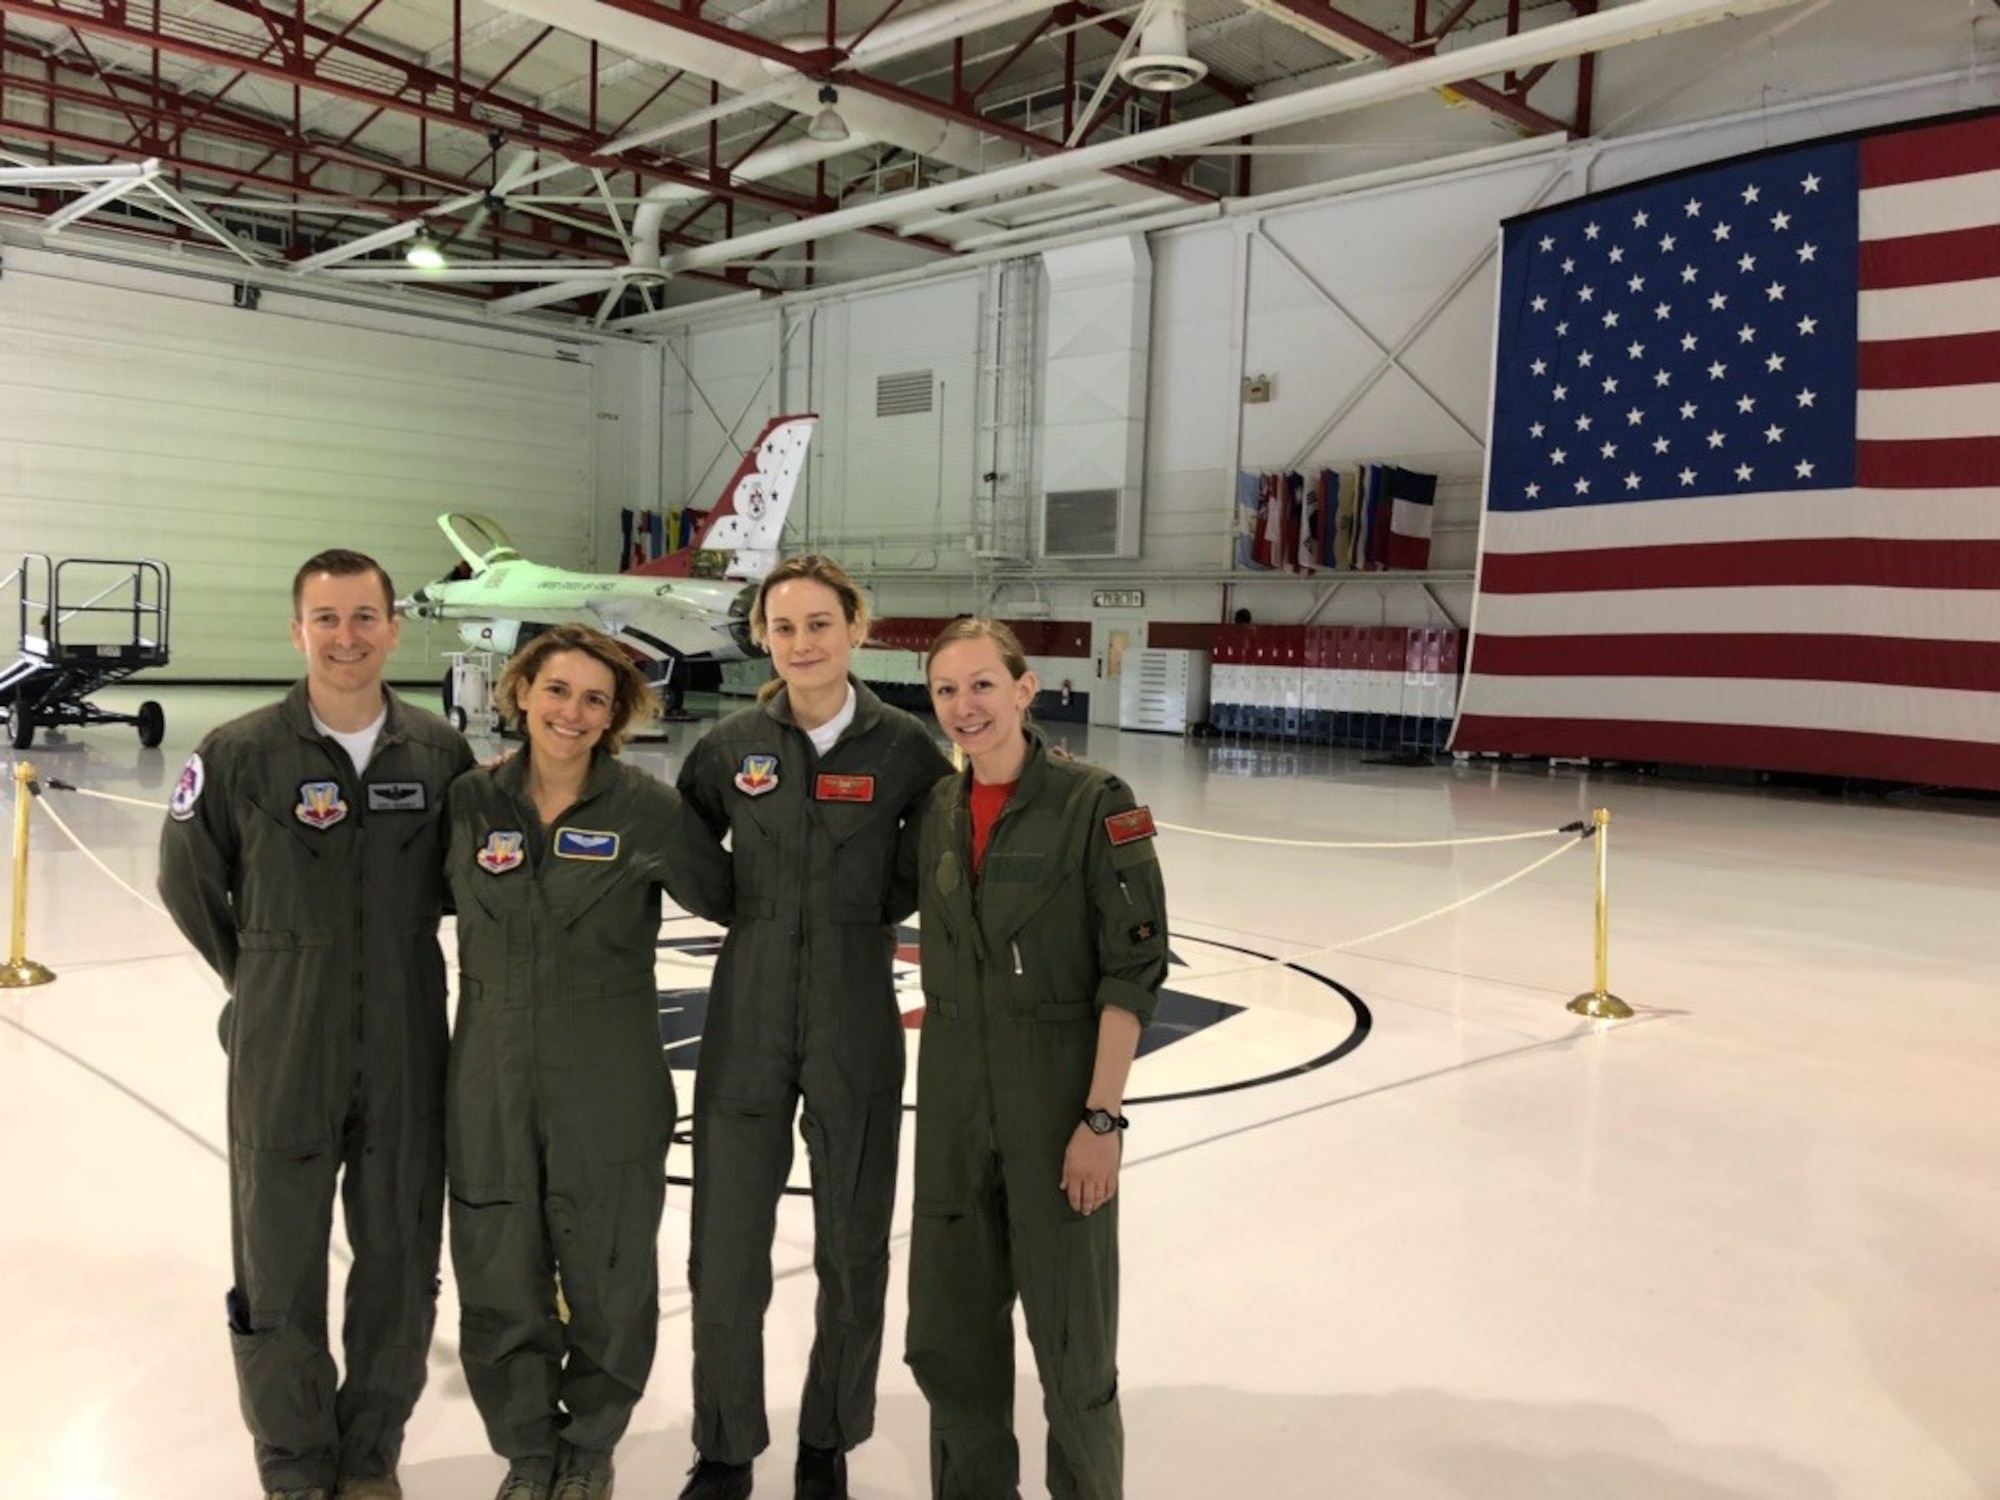 Capt. Danielle Park (right), 311th Fighter Squadron instructor pilot, stands next to Brie Larson, who stars in the Captain Marval film, in a hangar at Nellis Air Force Base, Nev. in 2018. Park was invited to attend the premiere of Captain Marval in Los Angeles, Calif., March 3-4, 2019, after giving the actress, Brie Larson, a ride in an F-16 Fighting Falcon while stationed at Nellis. (Courtesy photo)